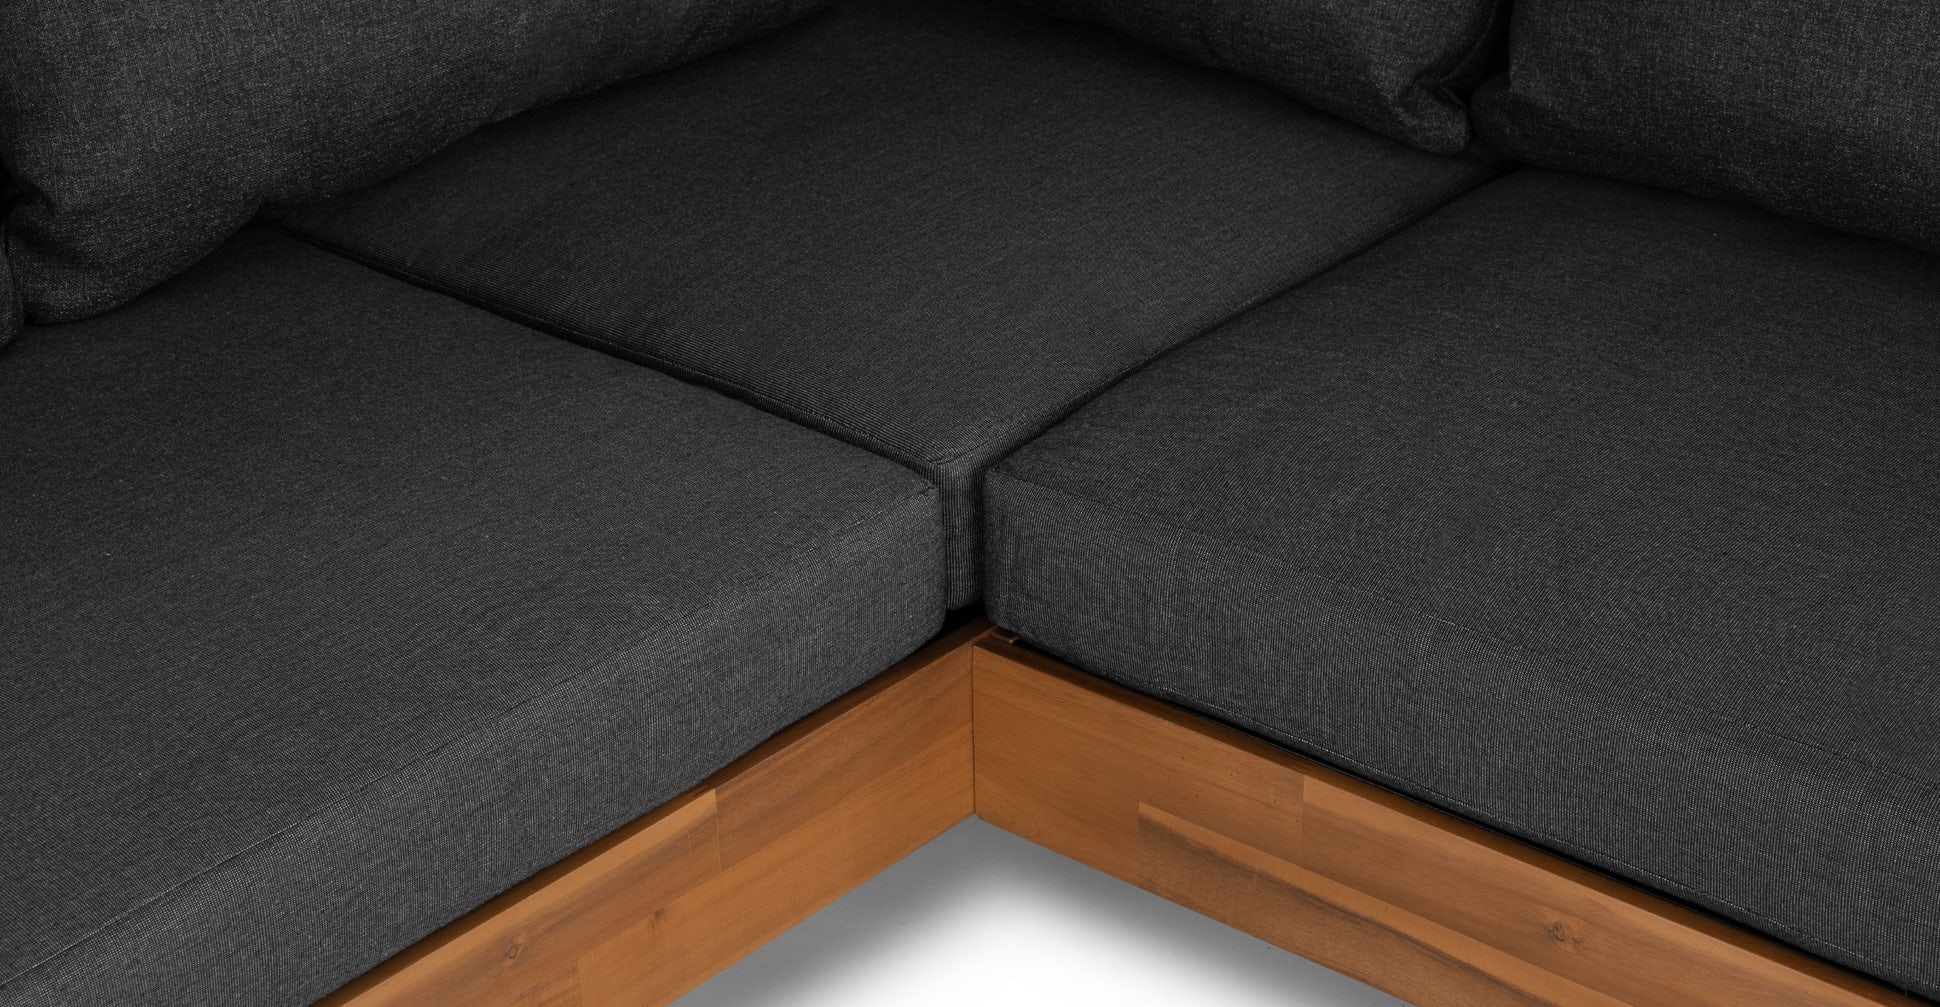 Lubek Sectional - Image 5